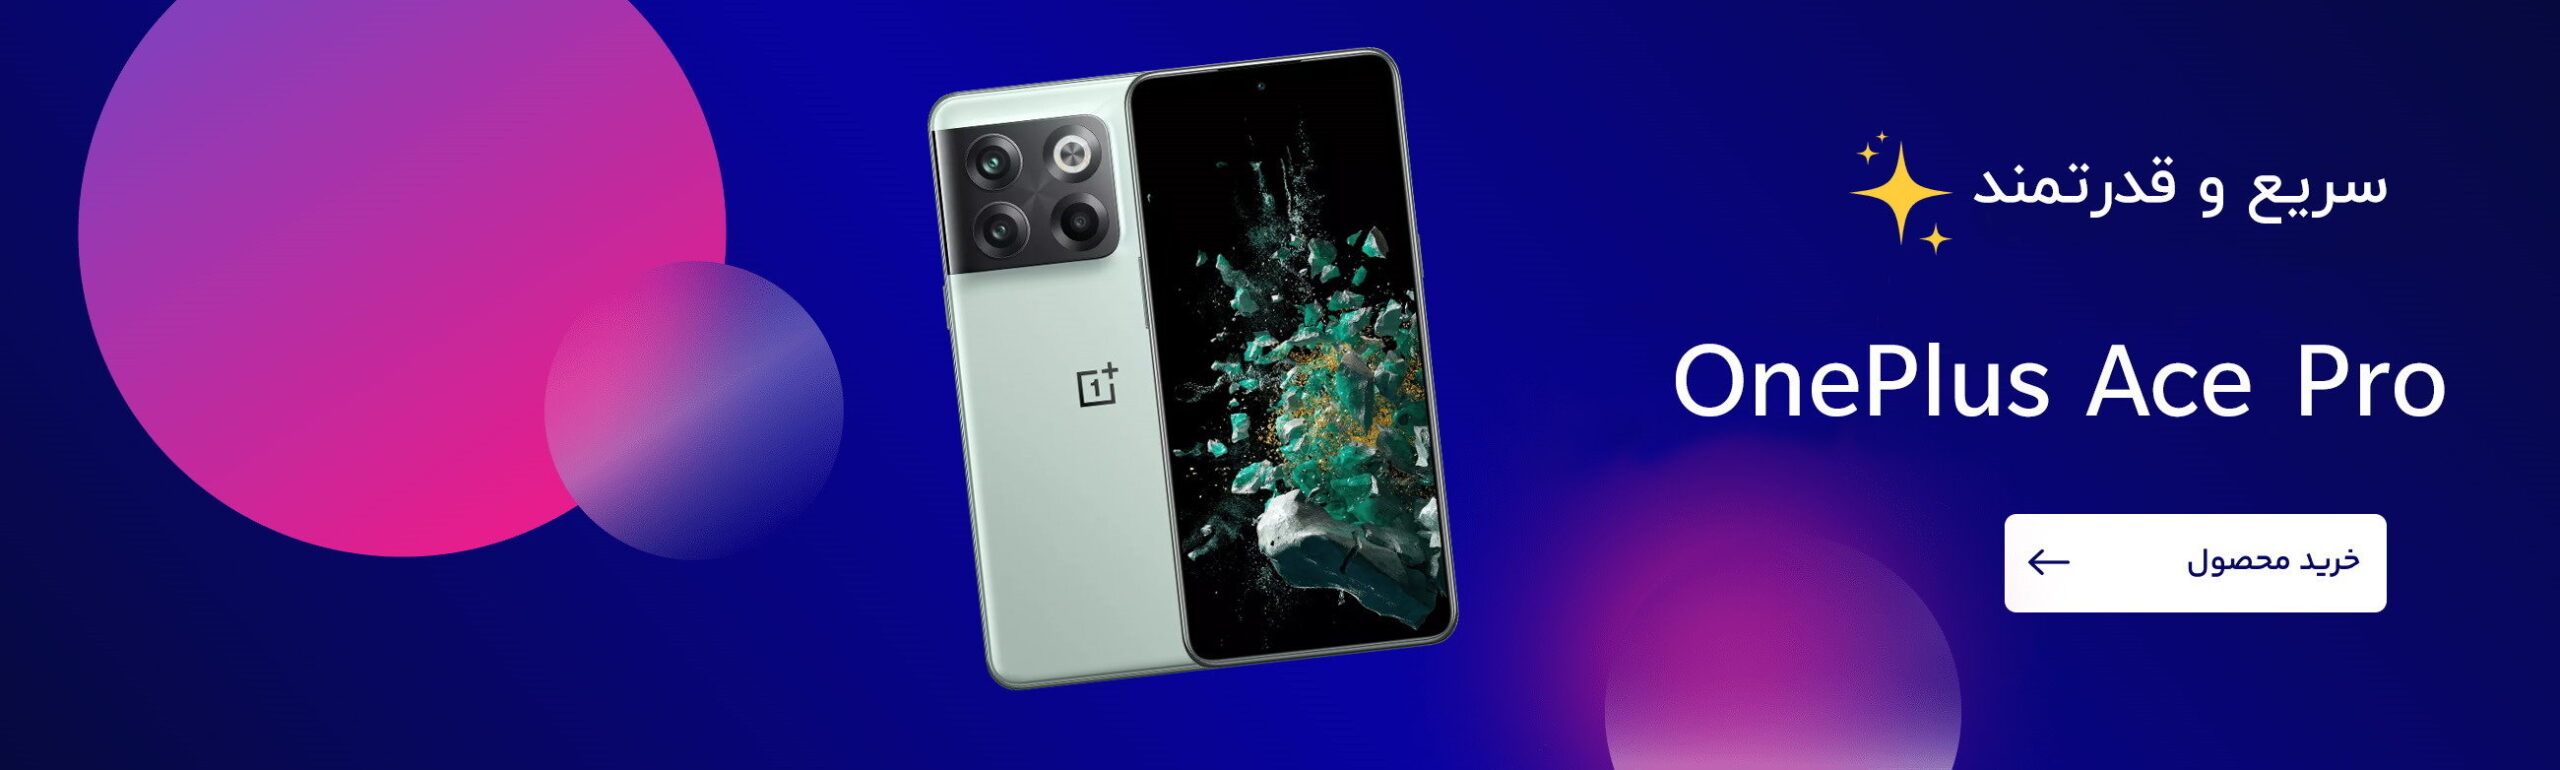 oneplus ace pro banner